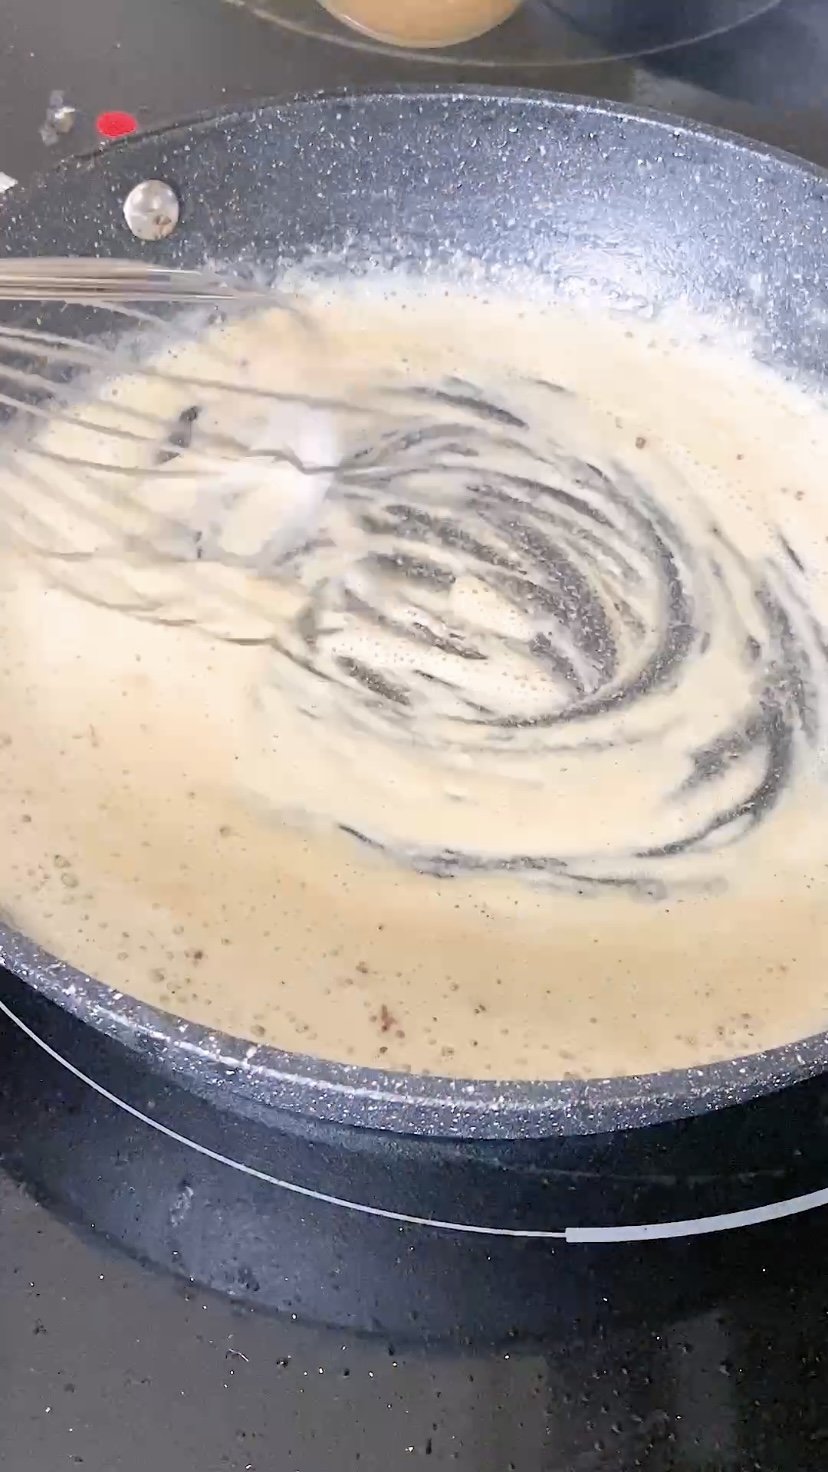 Whisking butter and flour together to make a roux for gravy.